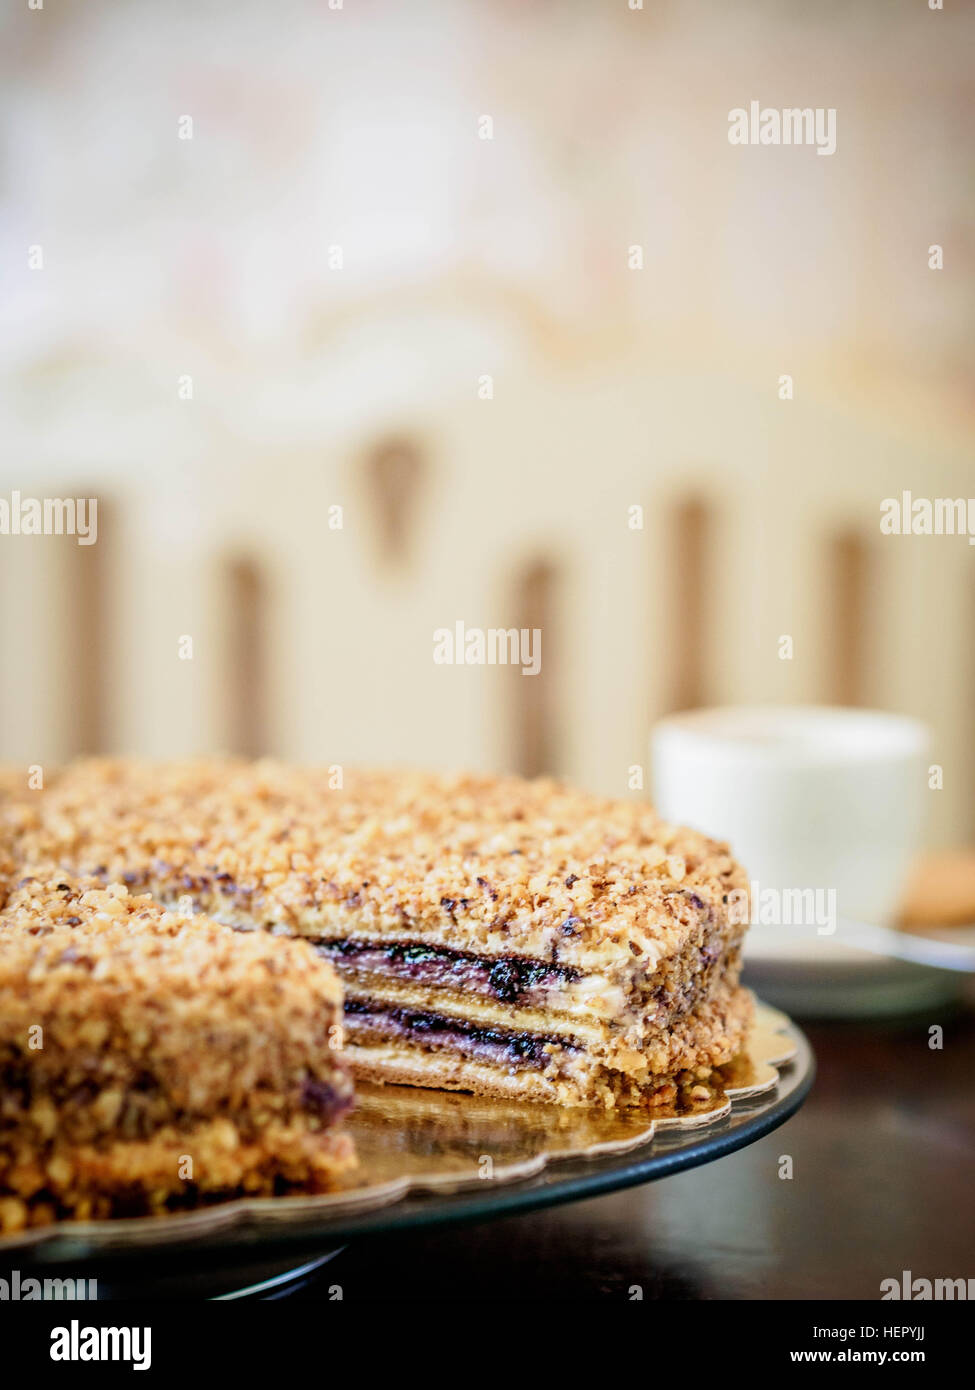 Close-up of a raspberry and nut  cake with missing slice Stock Photo